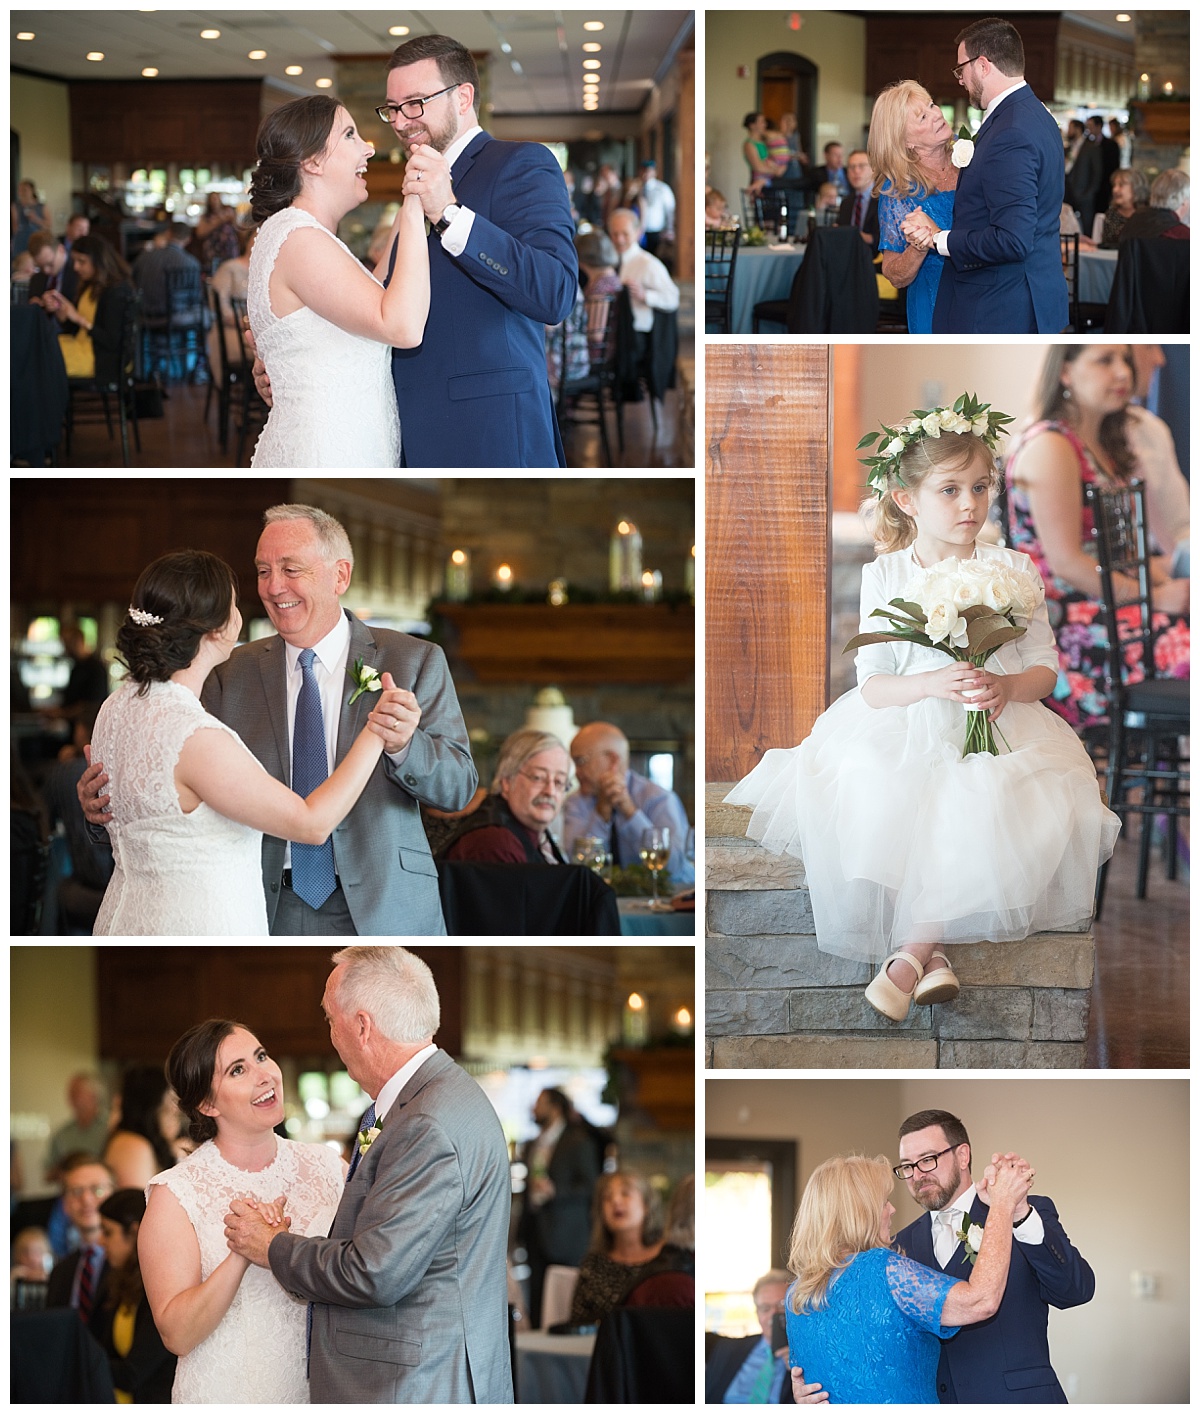 First dances at stone river